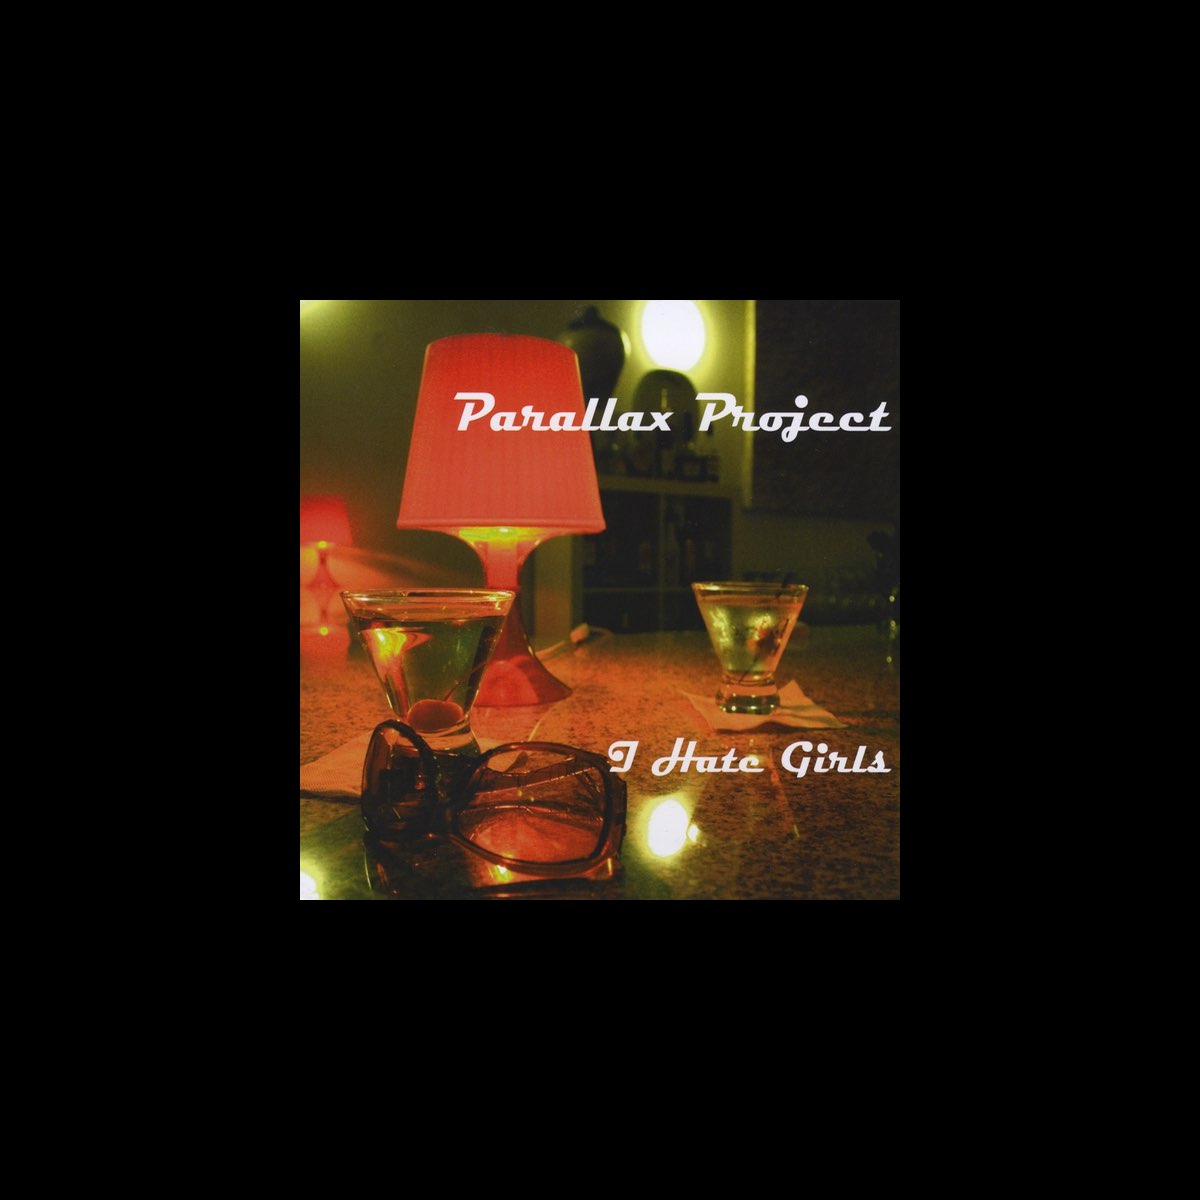 I Hate Girls by Parallax Project on Apple Music